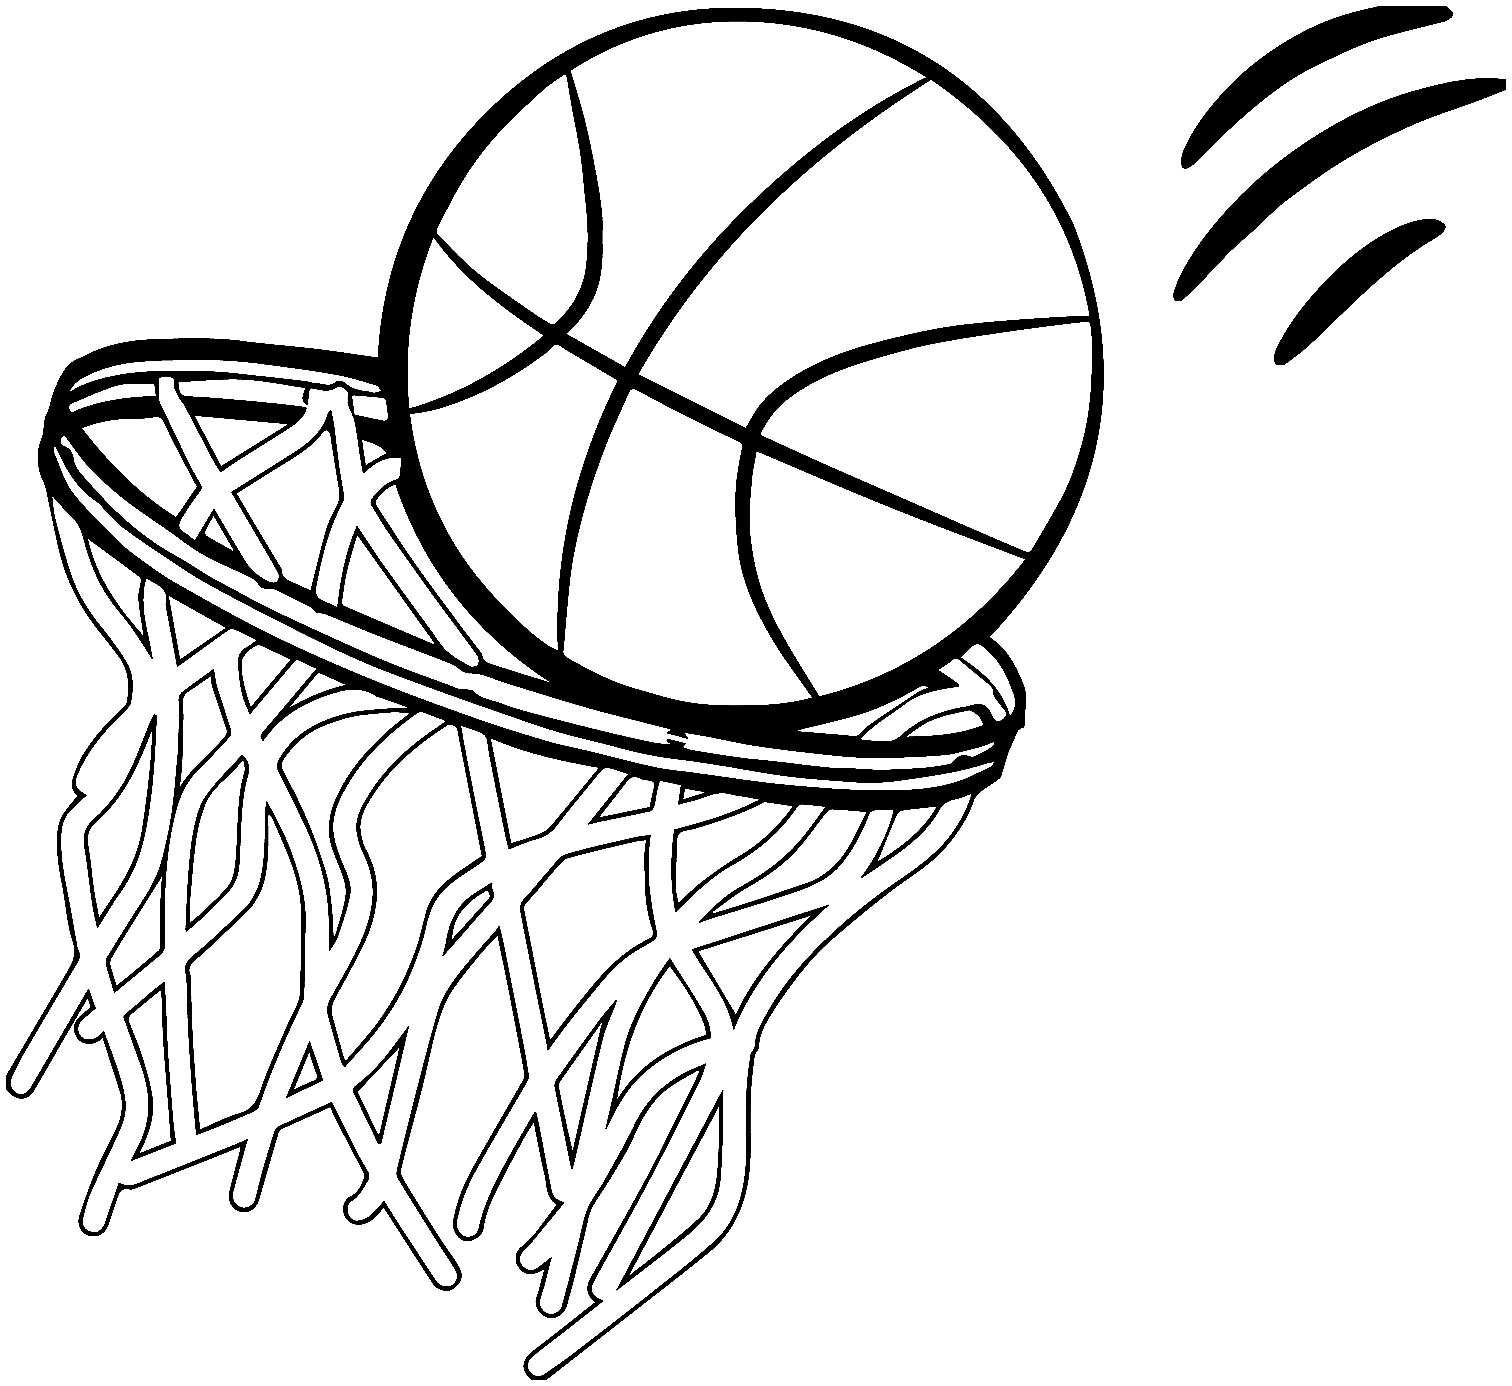 Basketball Coloring Pages To Print Basketball Kids Coloring Pages